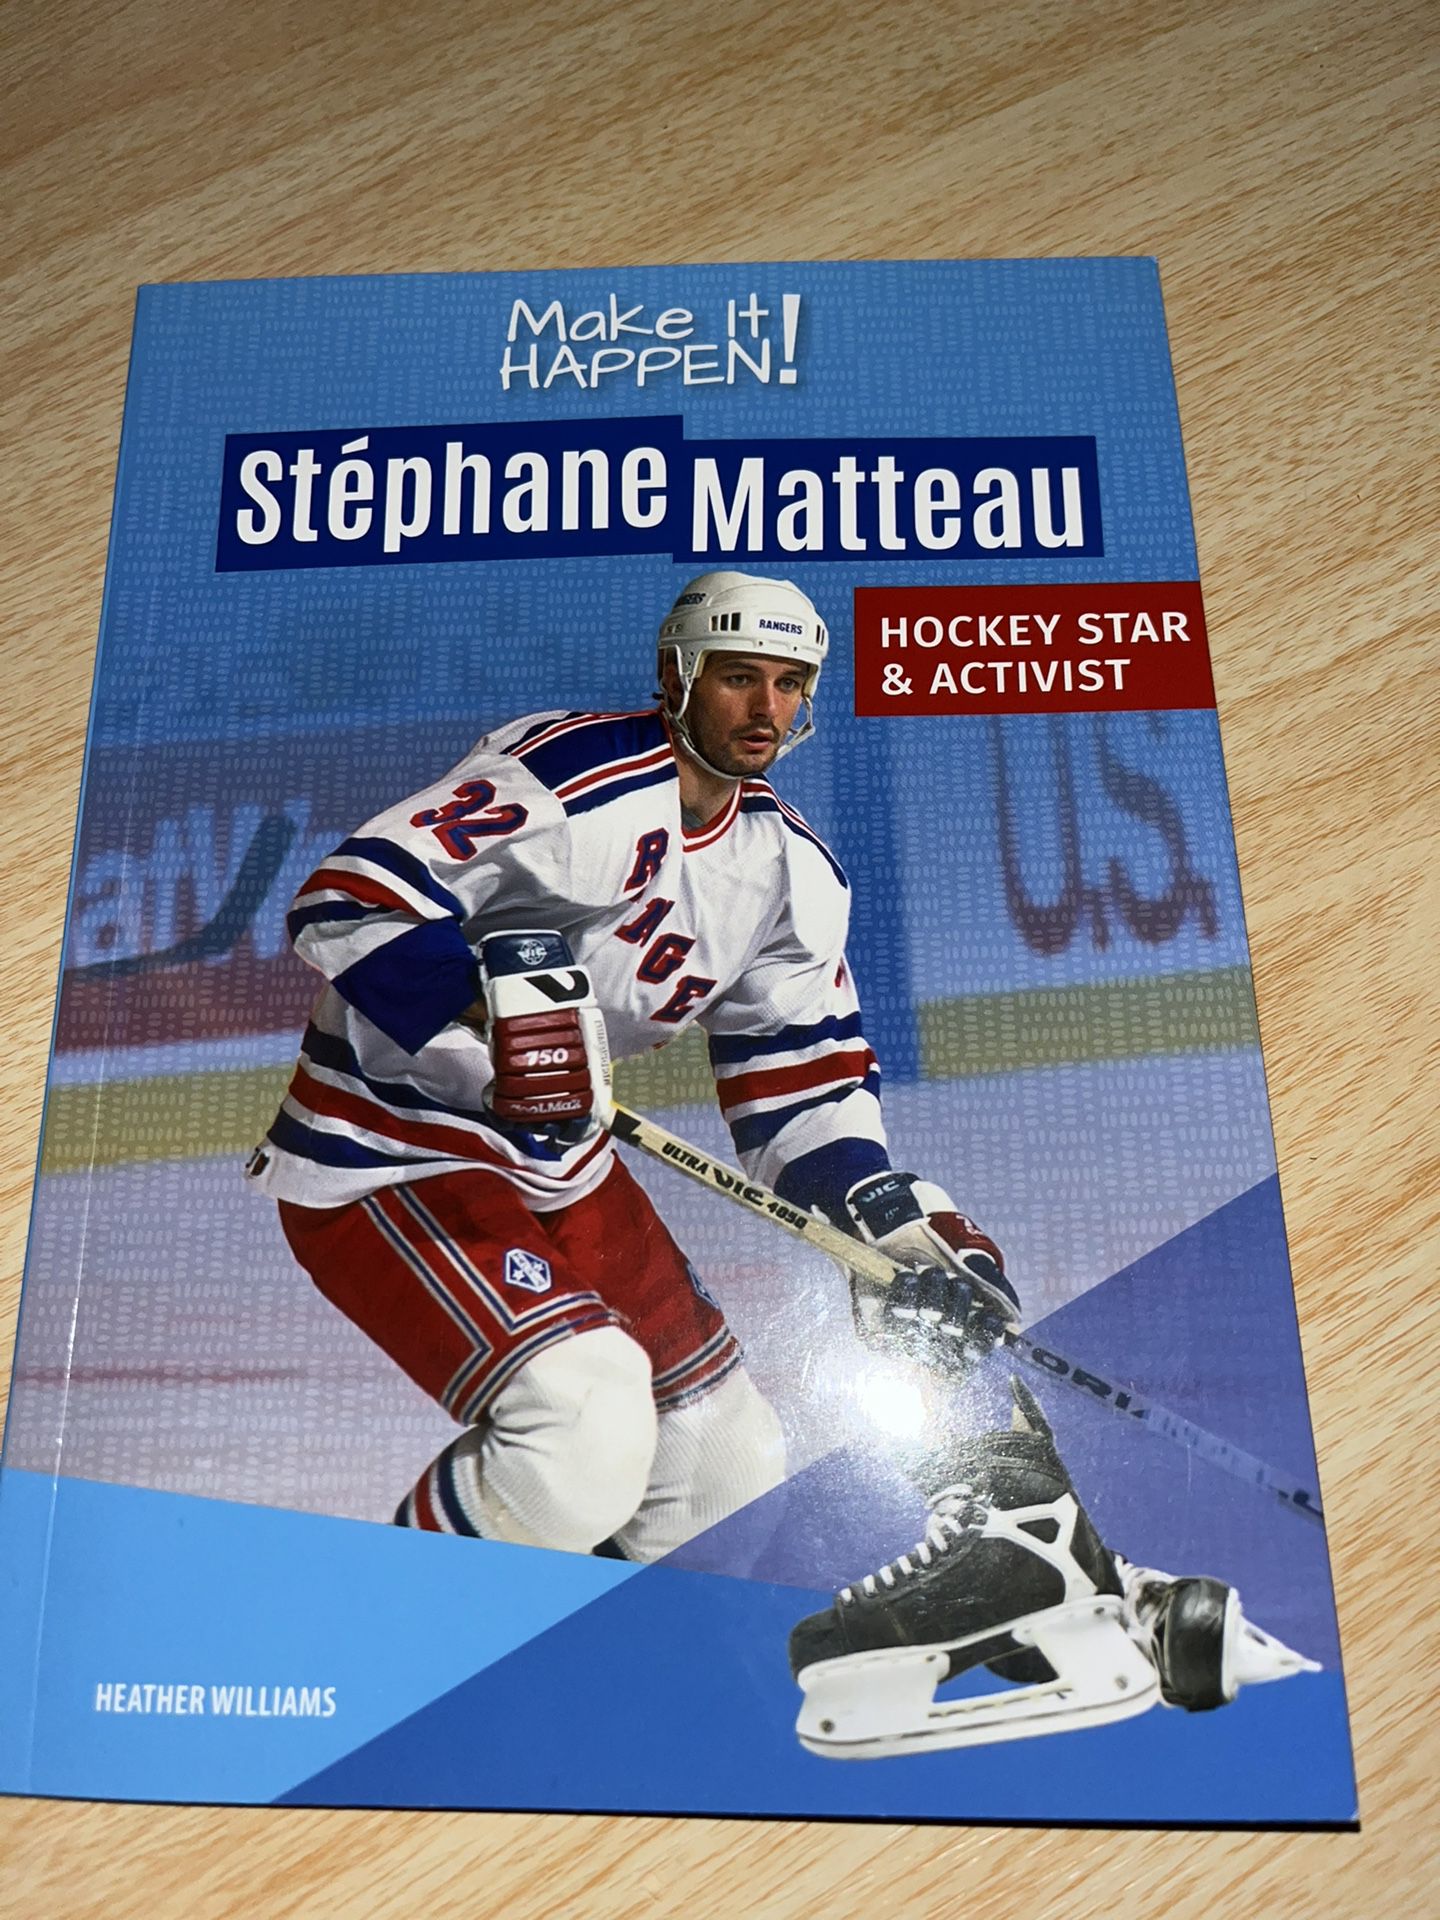 signed book by hockey player stephane matteau 